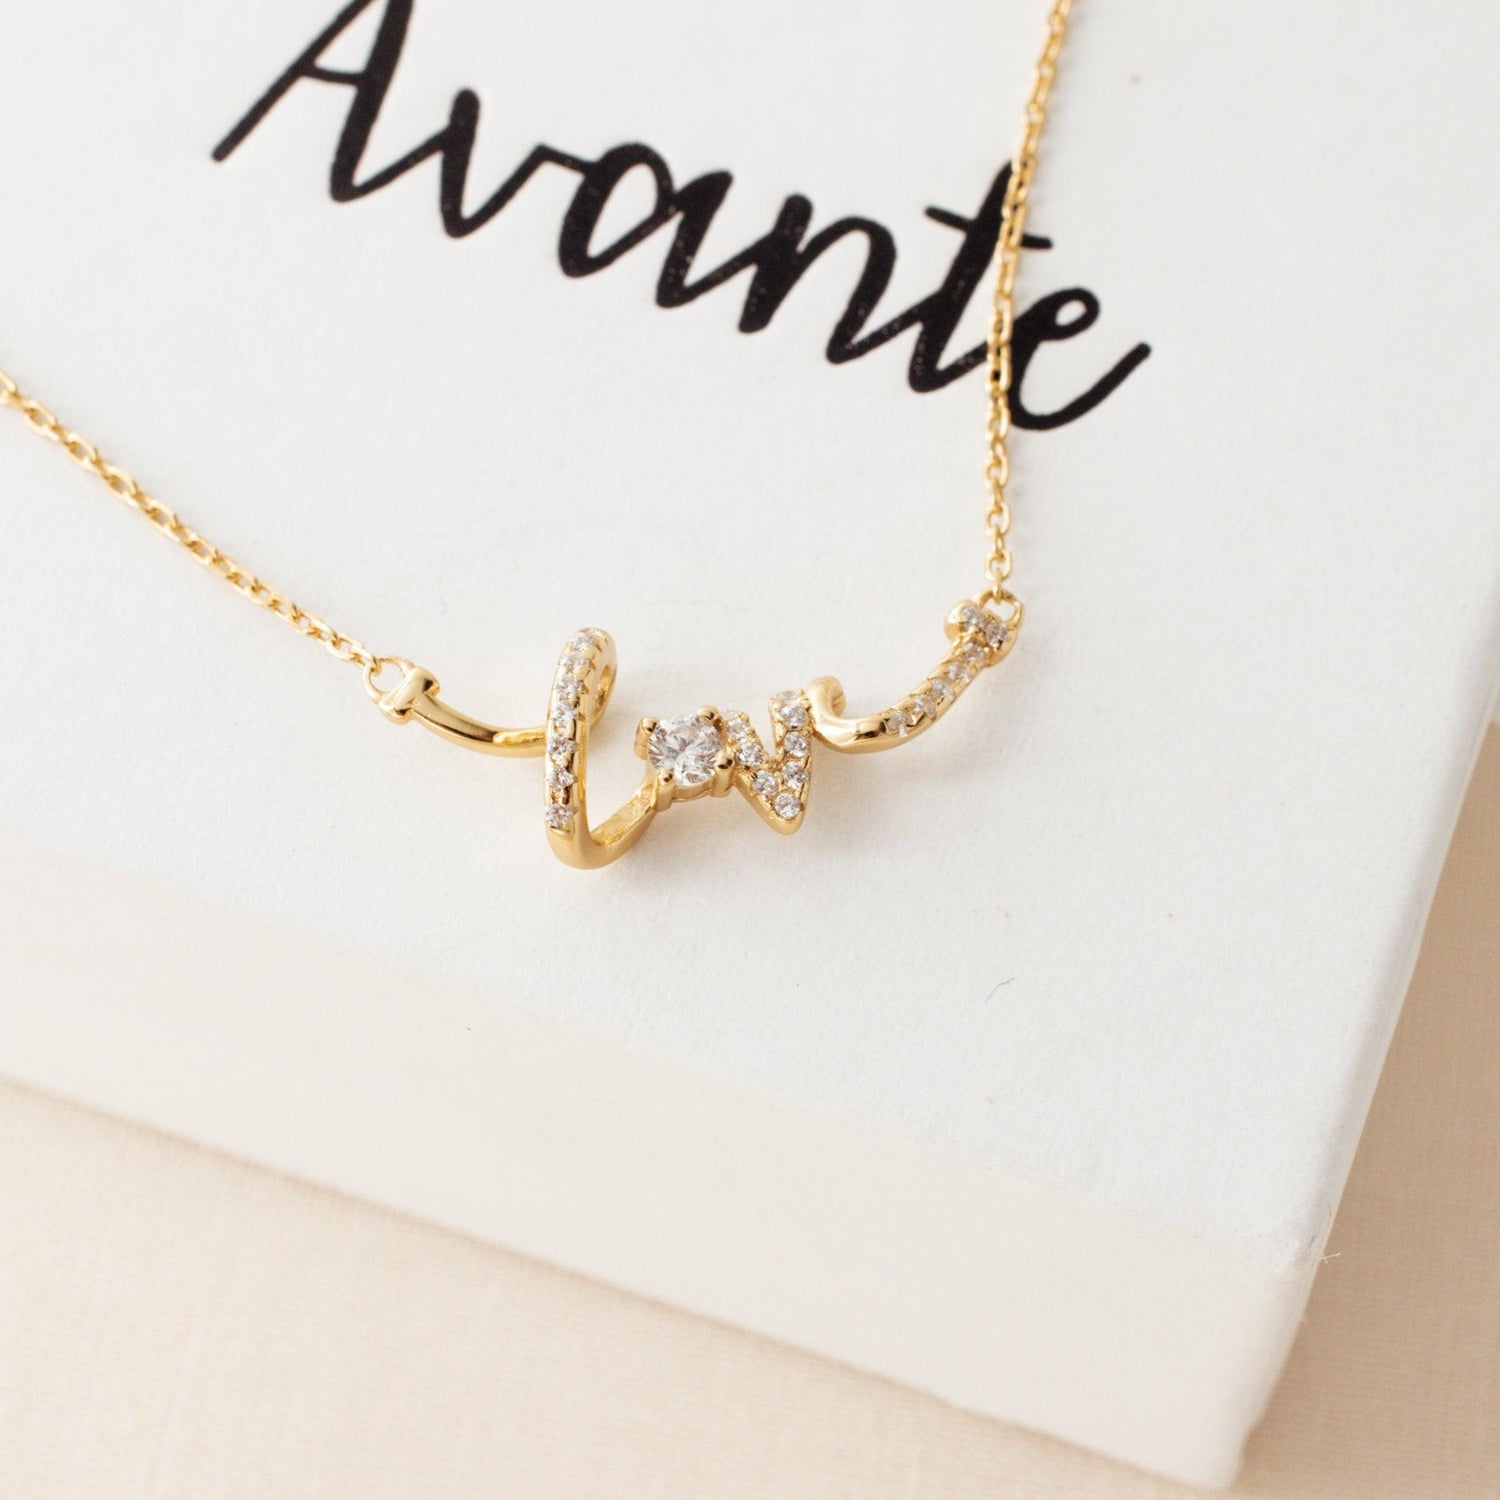 love pendant necklace on a gift box from avante jewel